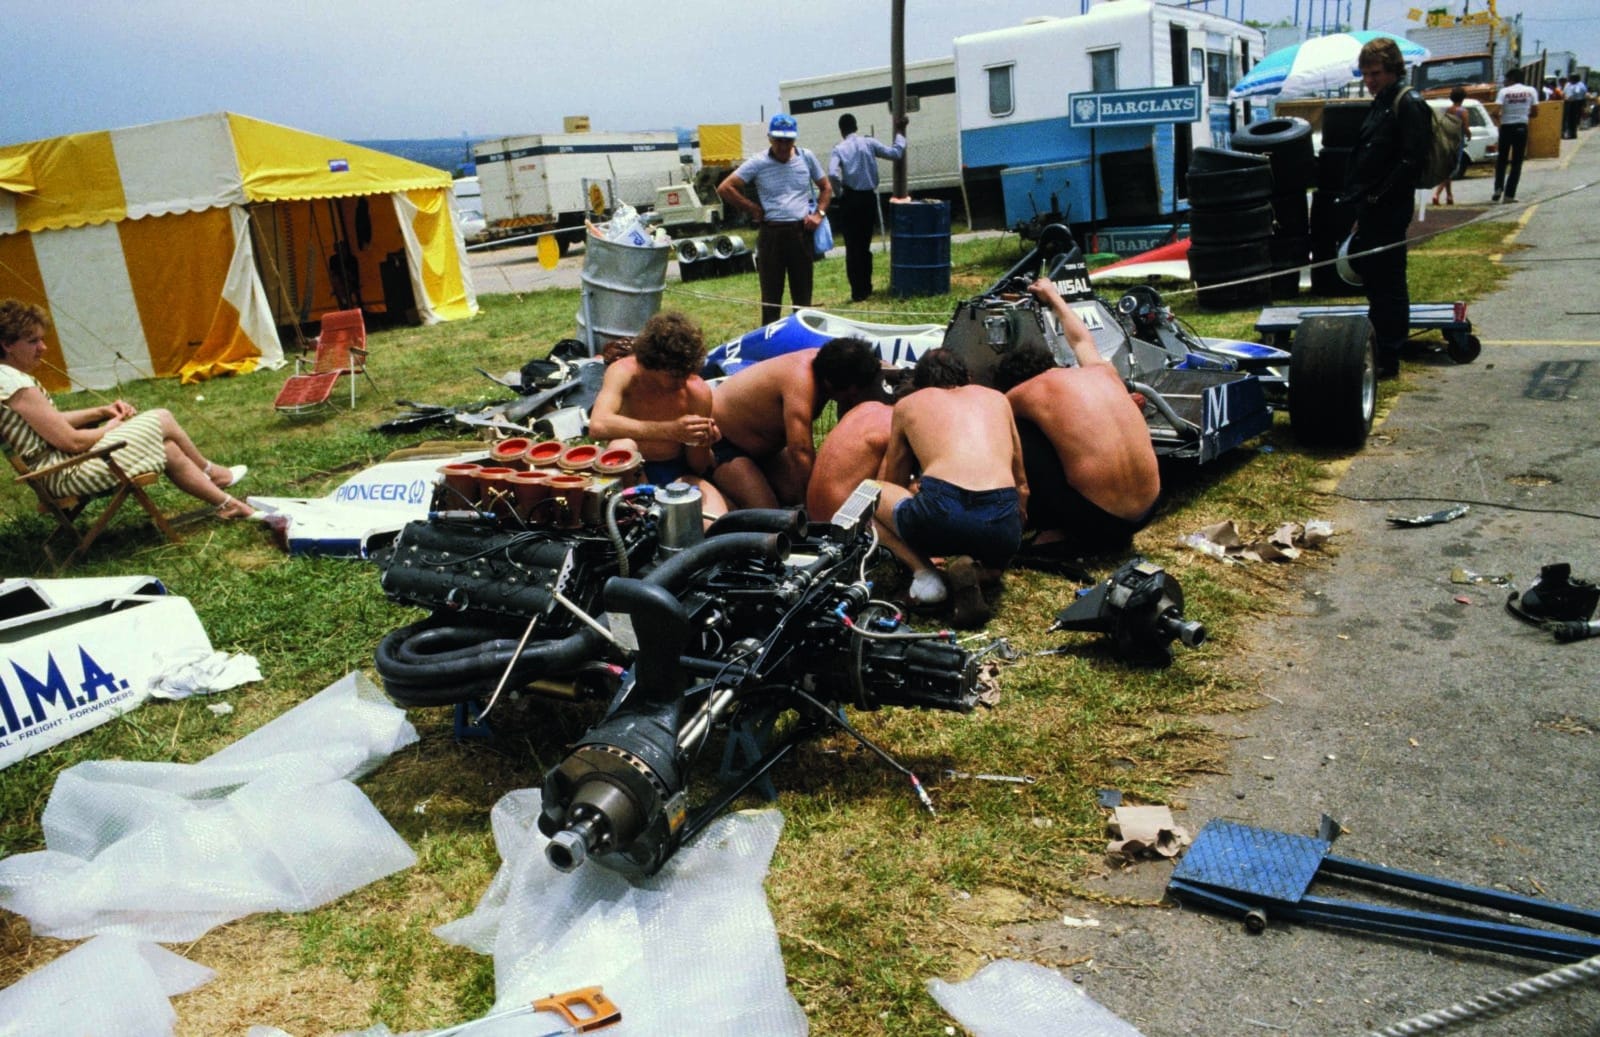 Shirtless-Osella-mechanics-work-on-stripped-down-F1-car-scaled